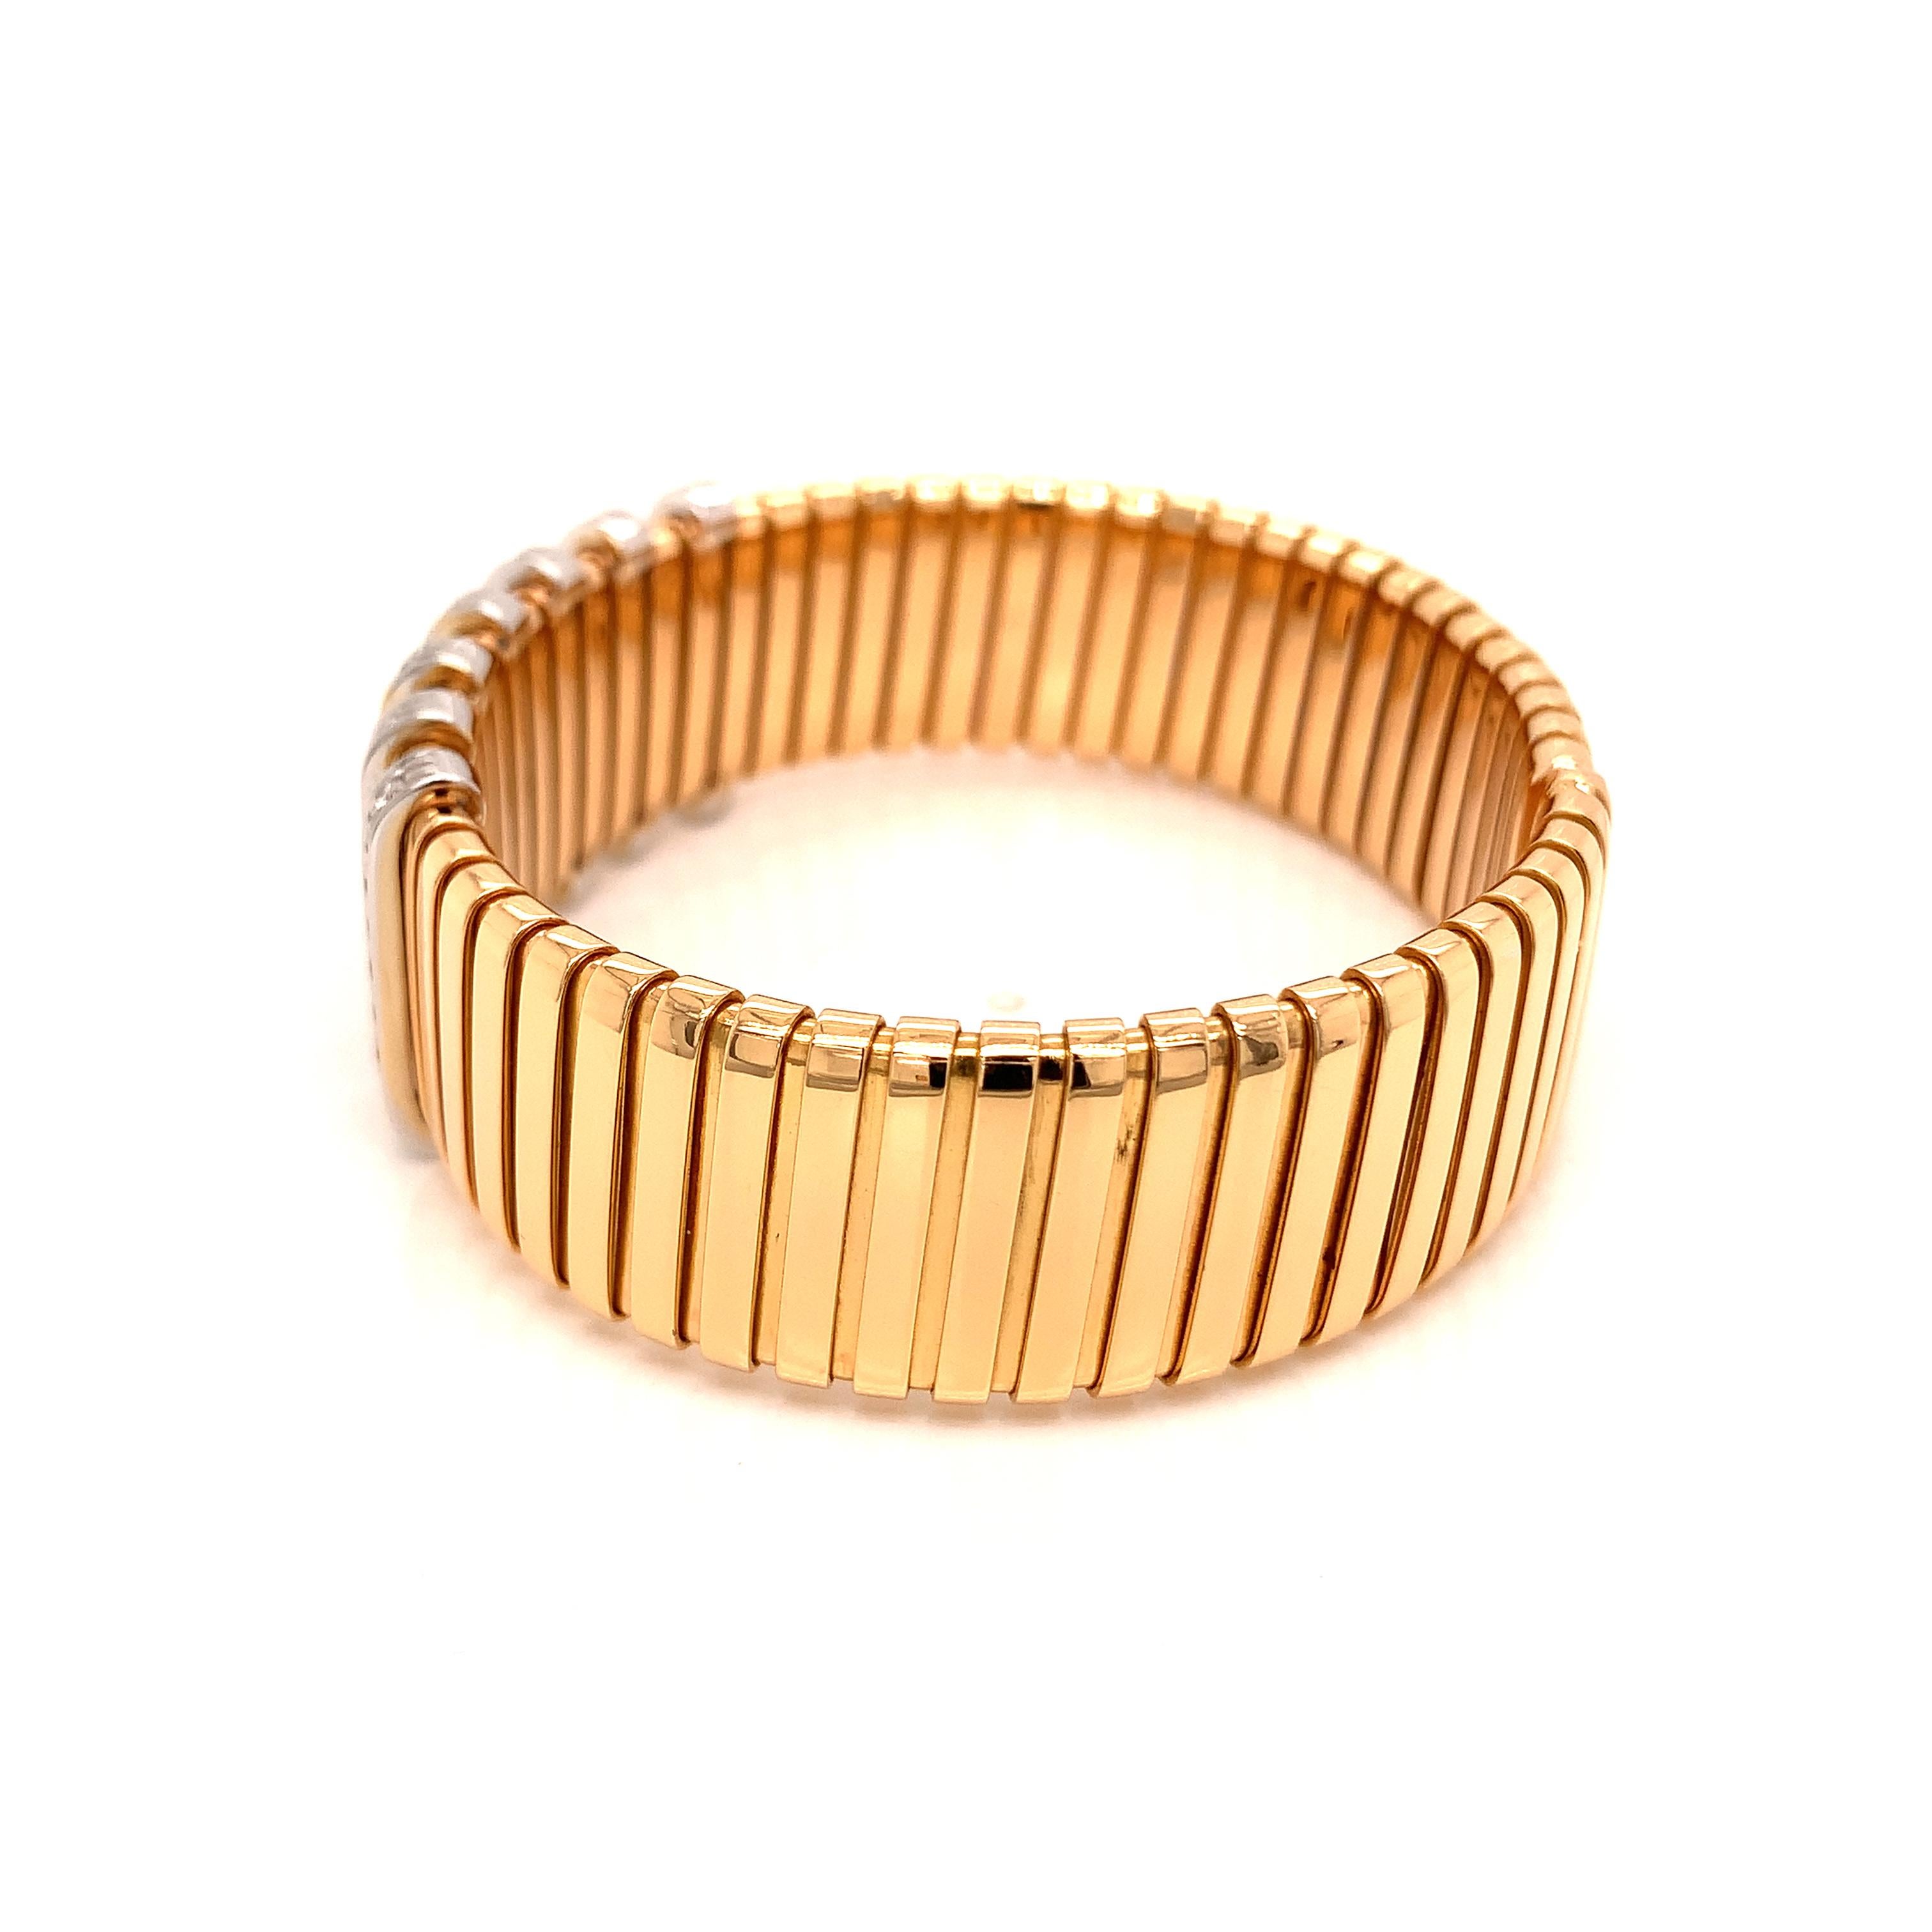 On sale on First Dibs only for 3 week.  This beautiful ring is a stunning piece created in Valenza.
An Italian  18kt Rose Gold Ring with Diamond Stations . Flat Large  tubogas with 5 white gold diamonds stripes 
Finger size US 7.5  european size 57,